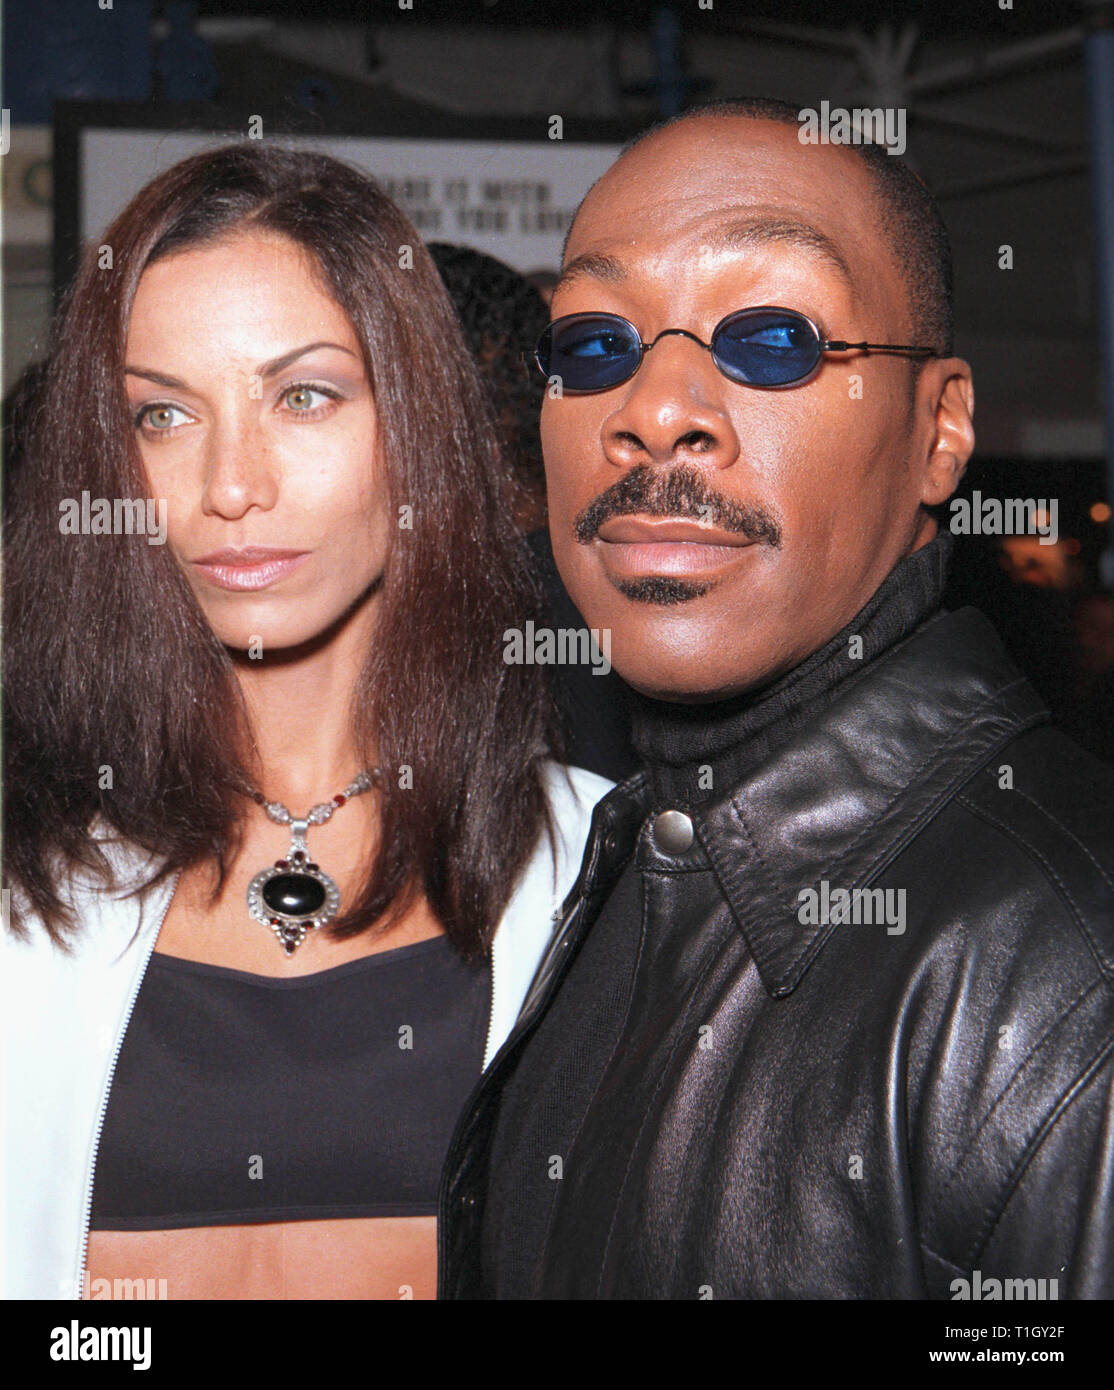 LOS ANGELES, CA - April 13, 1999: Actor EDDIE MURPHY & wife Nicole Mitchell Murphy at the world premiere in Los Angeles of his new movie 'Life' in which he stars with Martin Lawrence. © Paul Smith / Featureflash Stock Photo